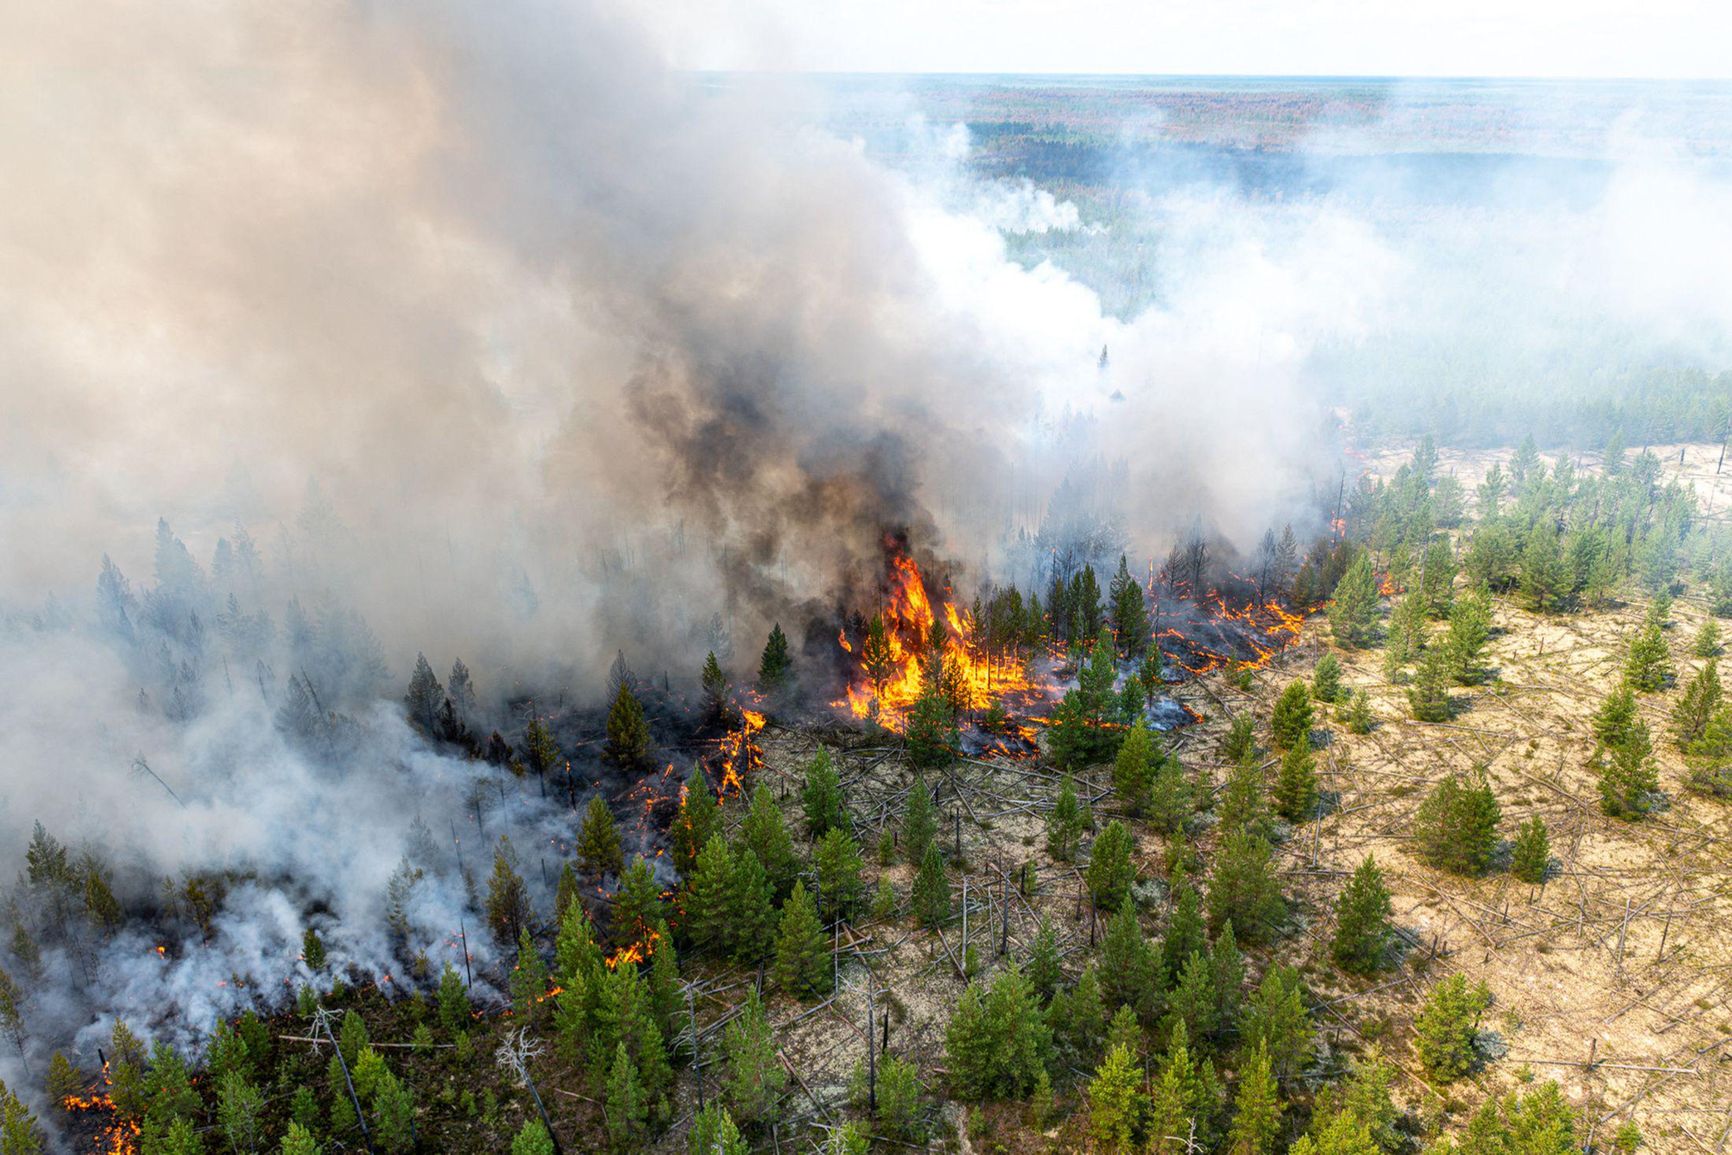 In 2018, forest fires in Russia affected an area of 3 million hectares